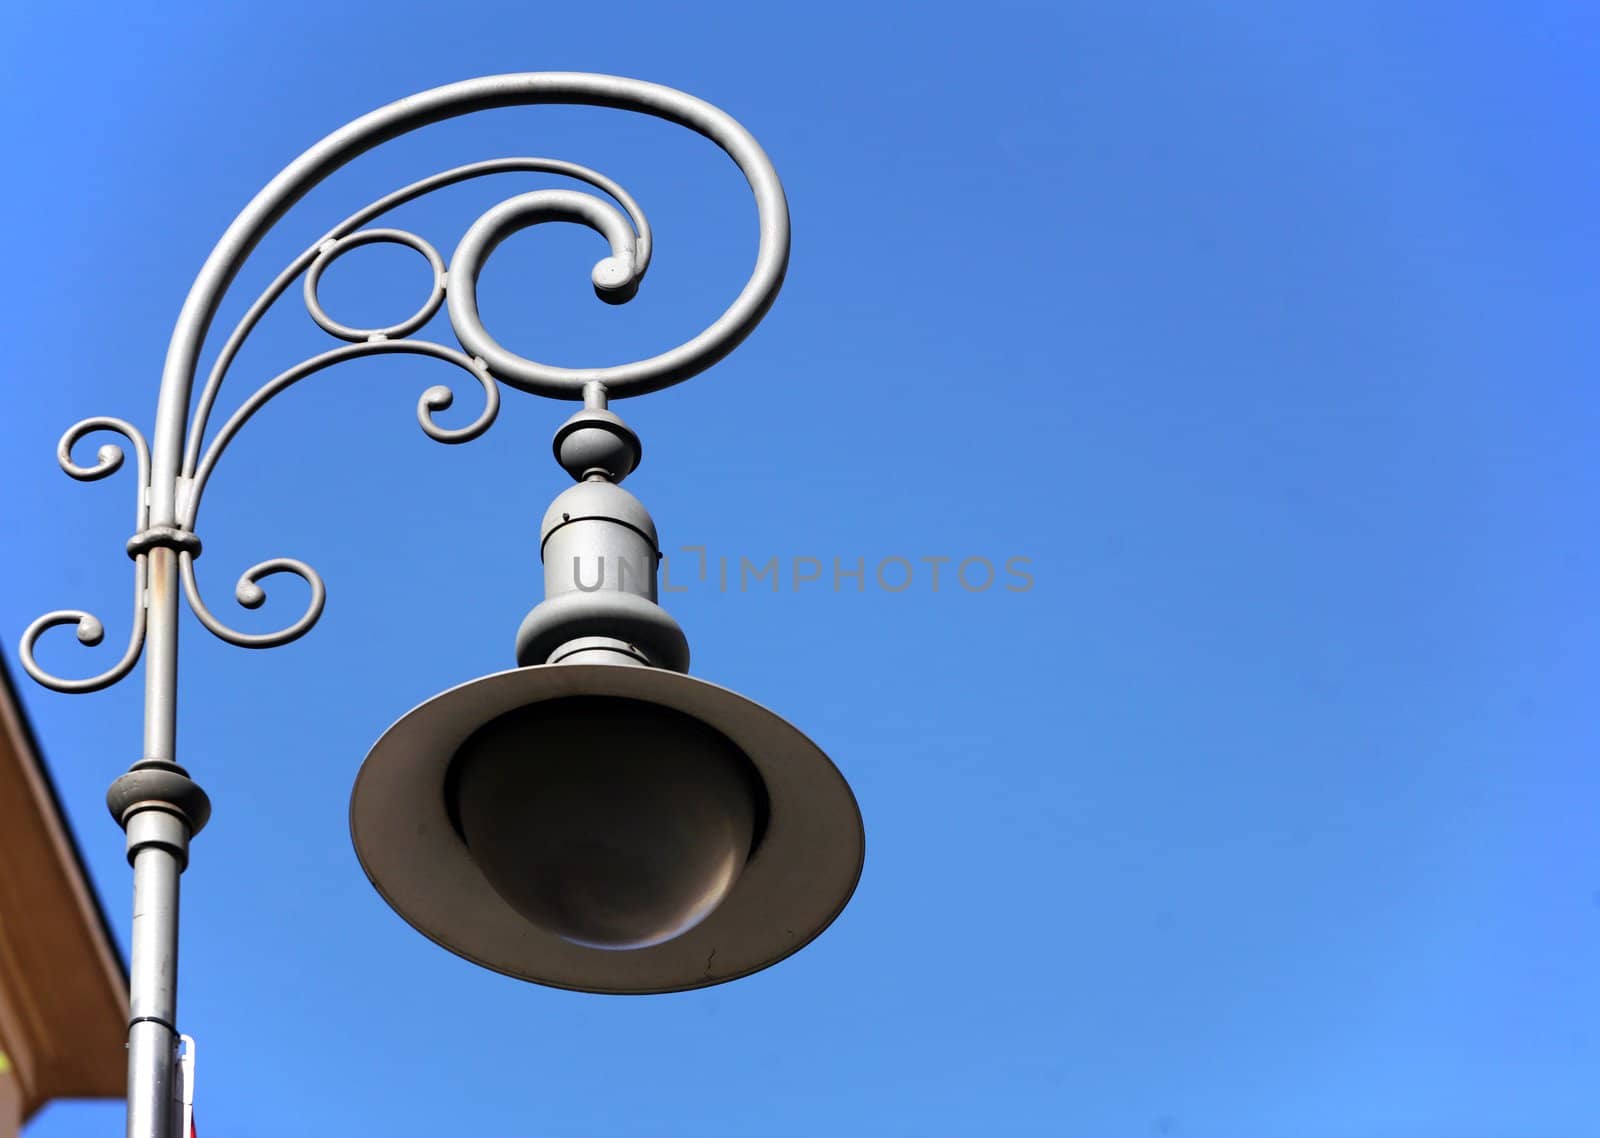 Detial of the old antique street lamp